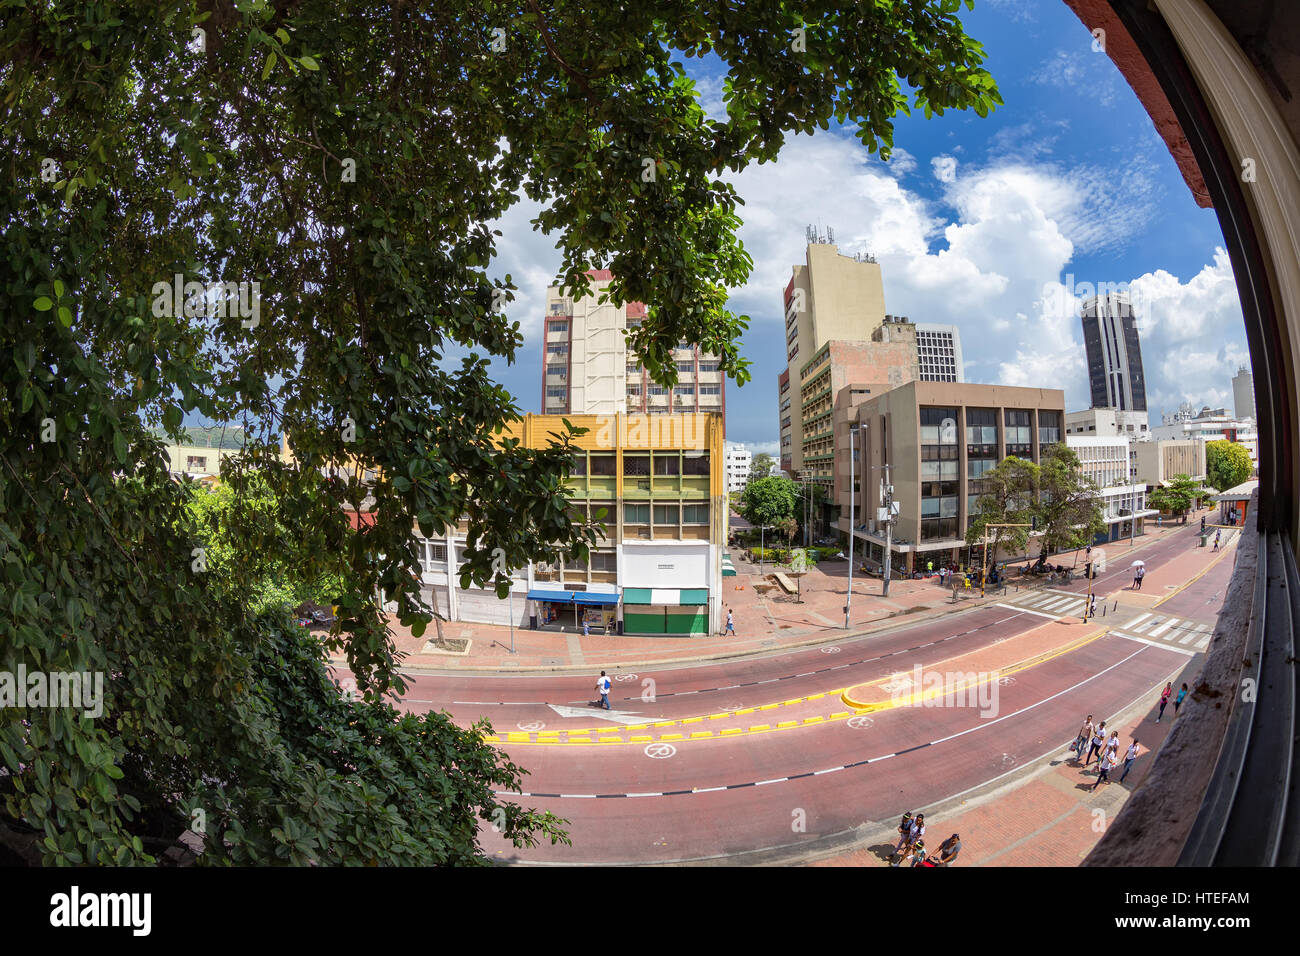 CARTAGENA, COLOMBIA - MAY 9: Fisheye view of Centro Cartagena on May 9, 2016 in Cartagena, Colombia. Stock Photo